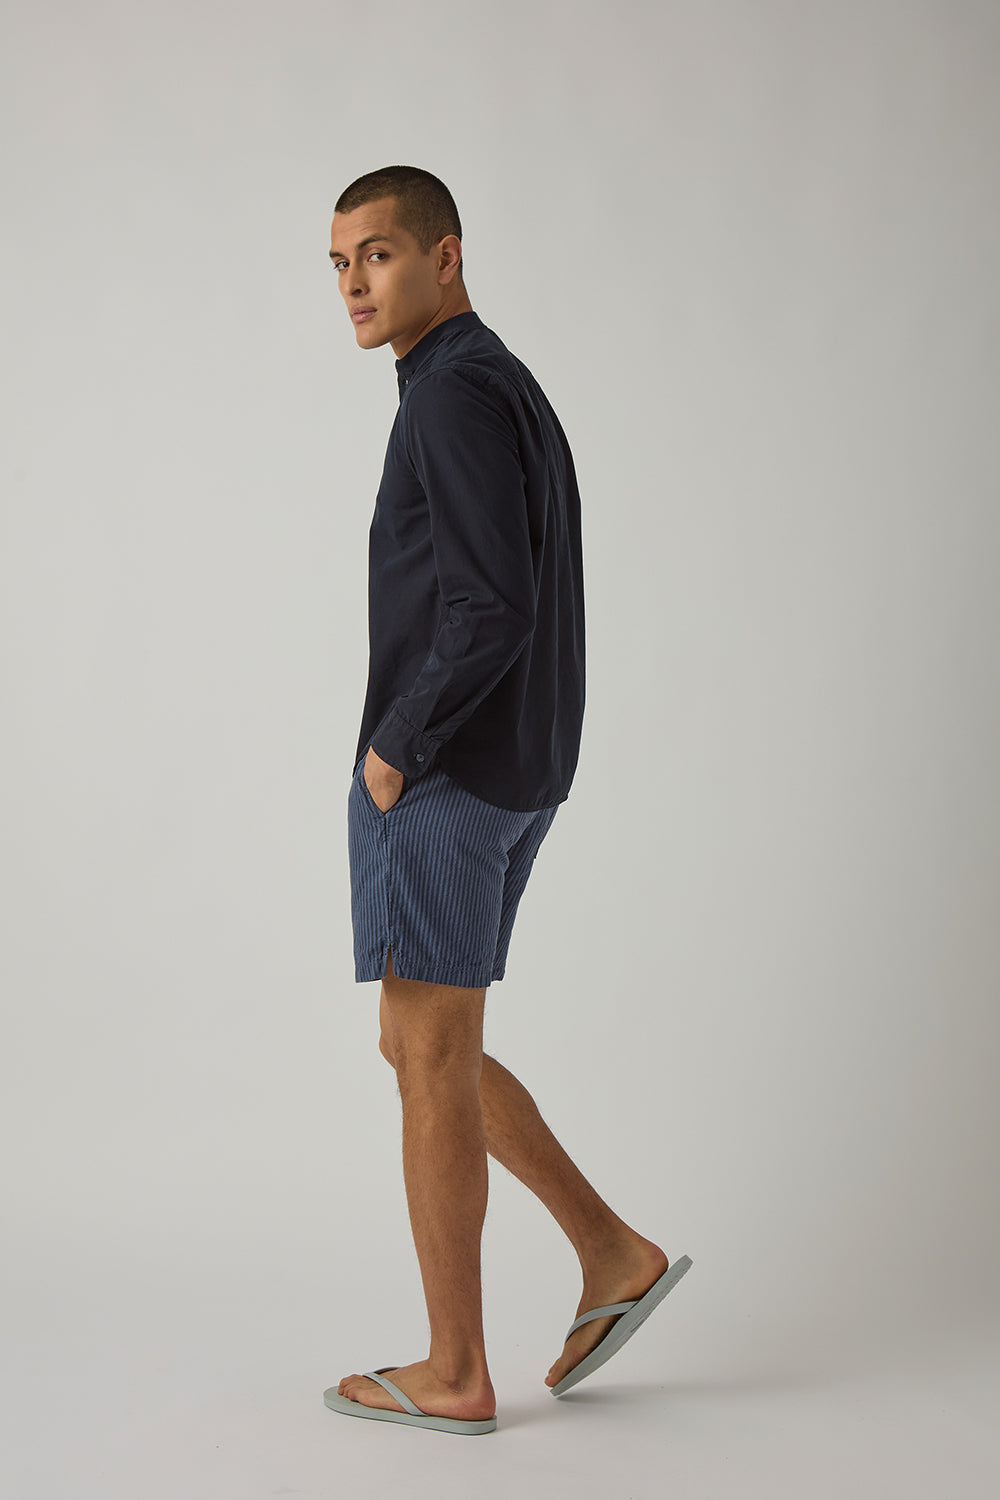 Stylish & Comfortable Shorts Collection